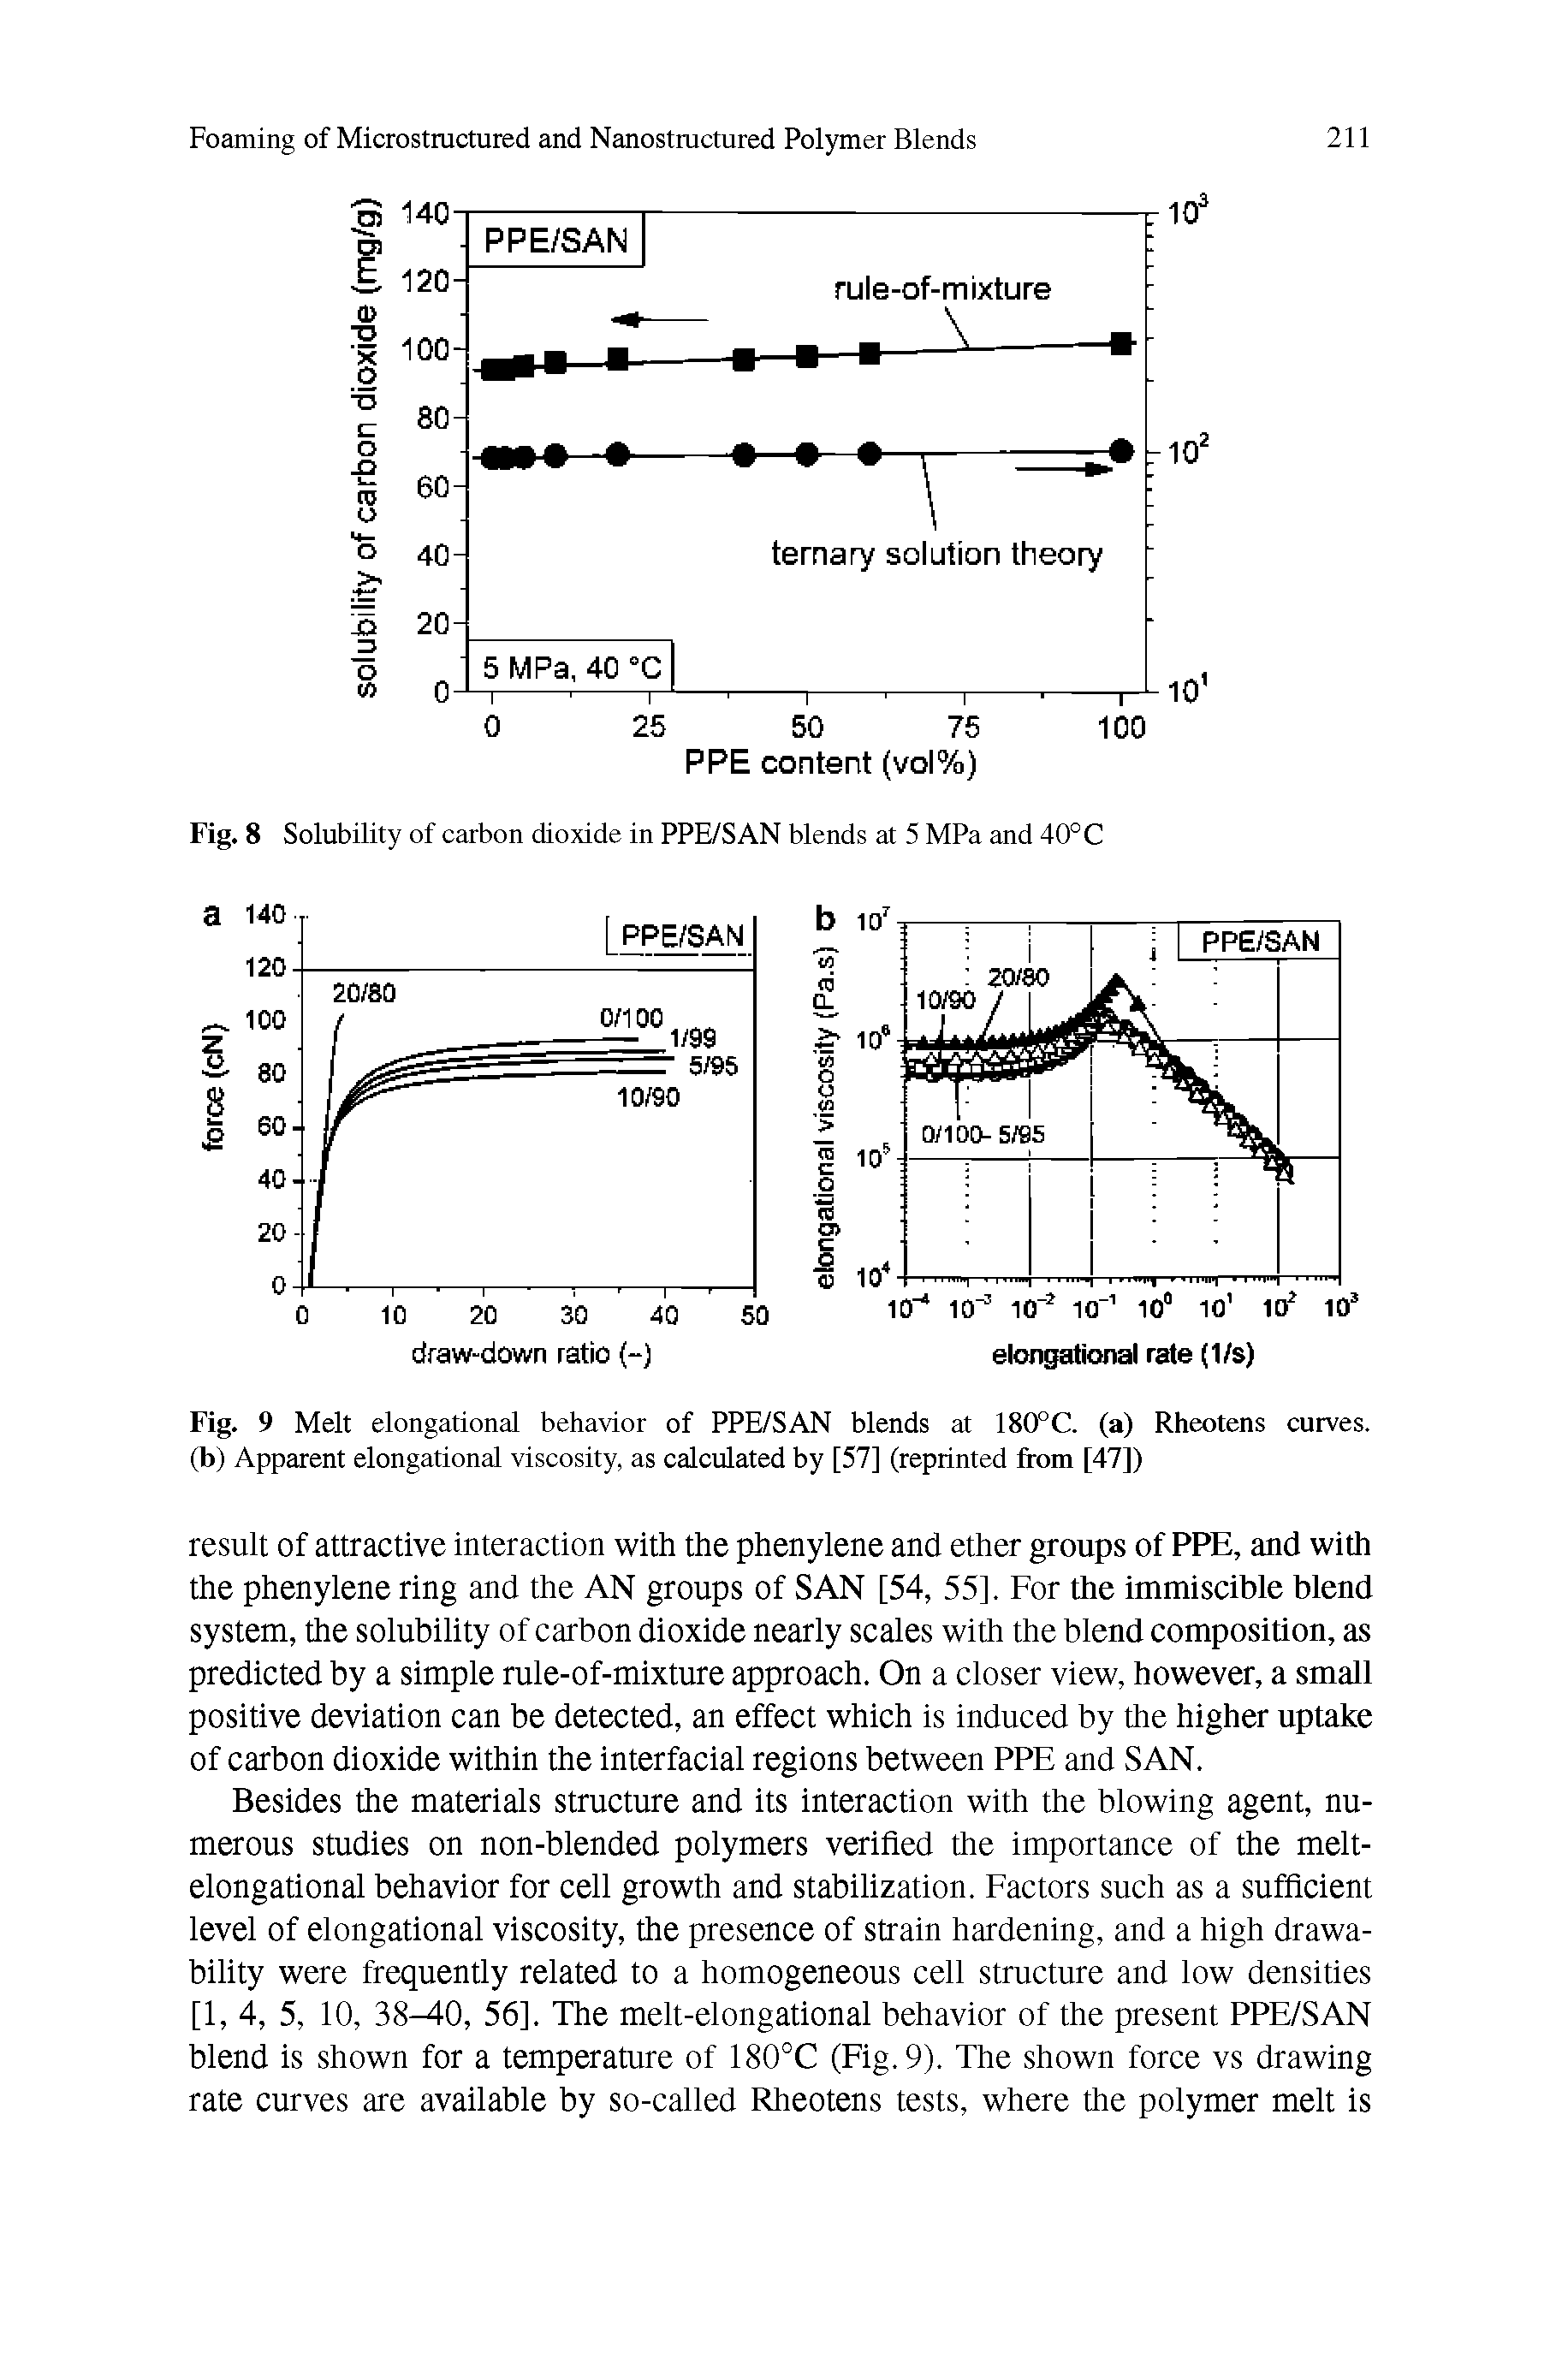 Fig. 9 Melt elongational behavior of PPE/SAN blends at 180°C. (a) Rheotens curves, (b) Apparent elongational viscosity, as calculated by [57] (reprinted from [47])...